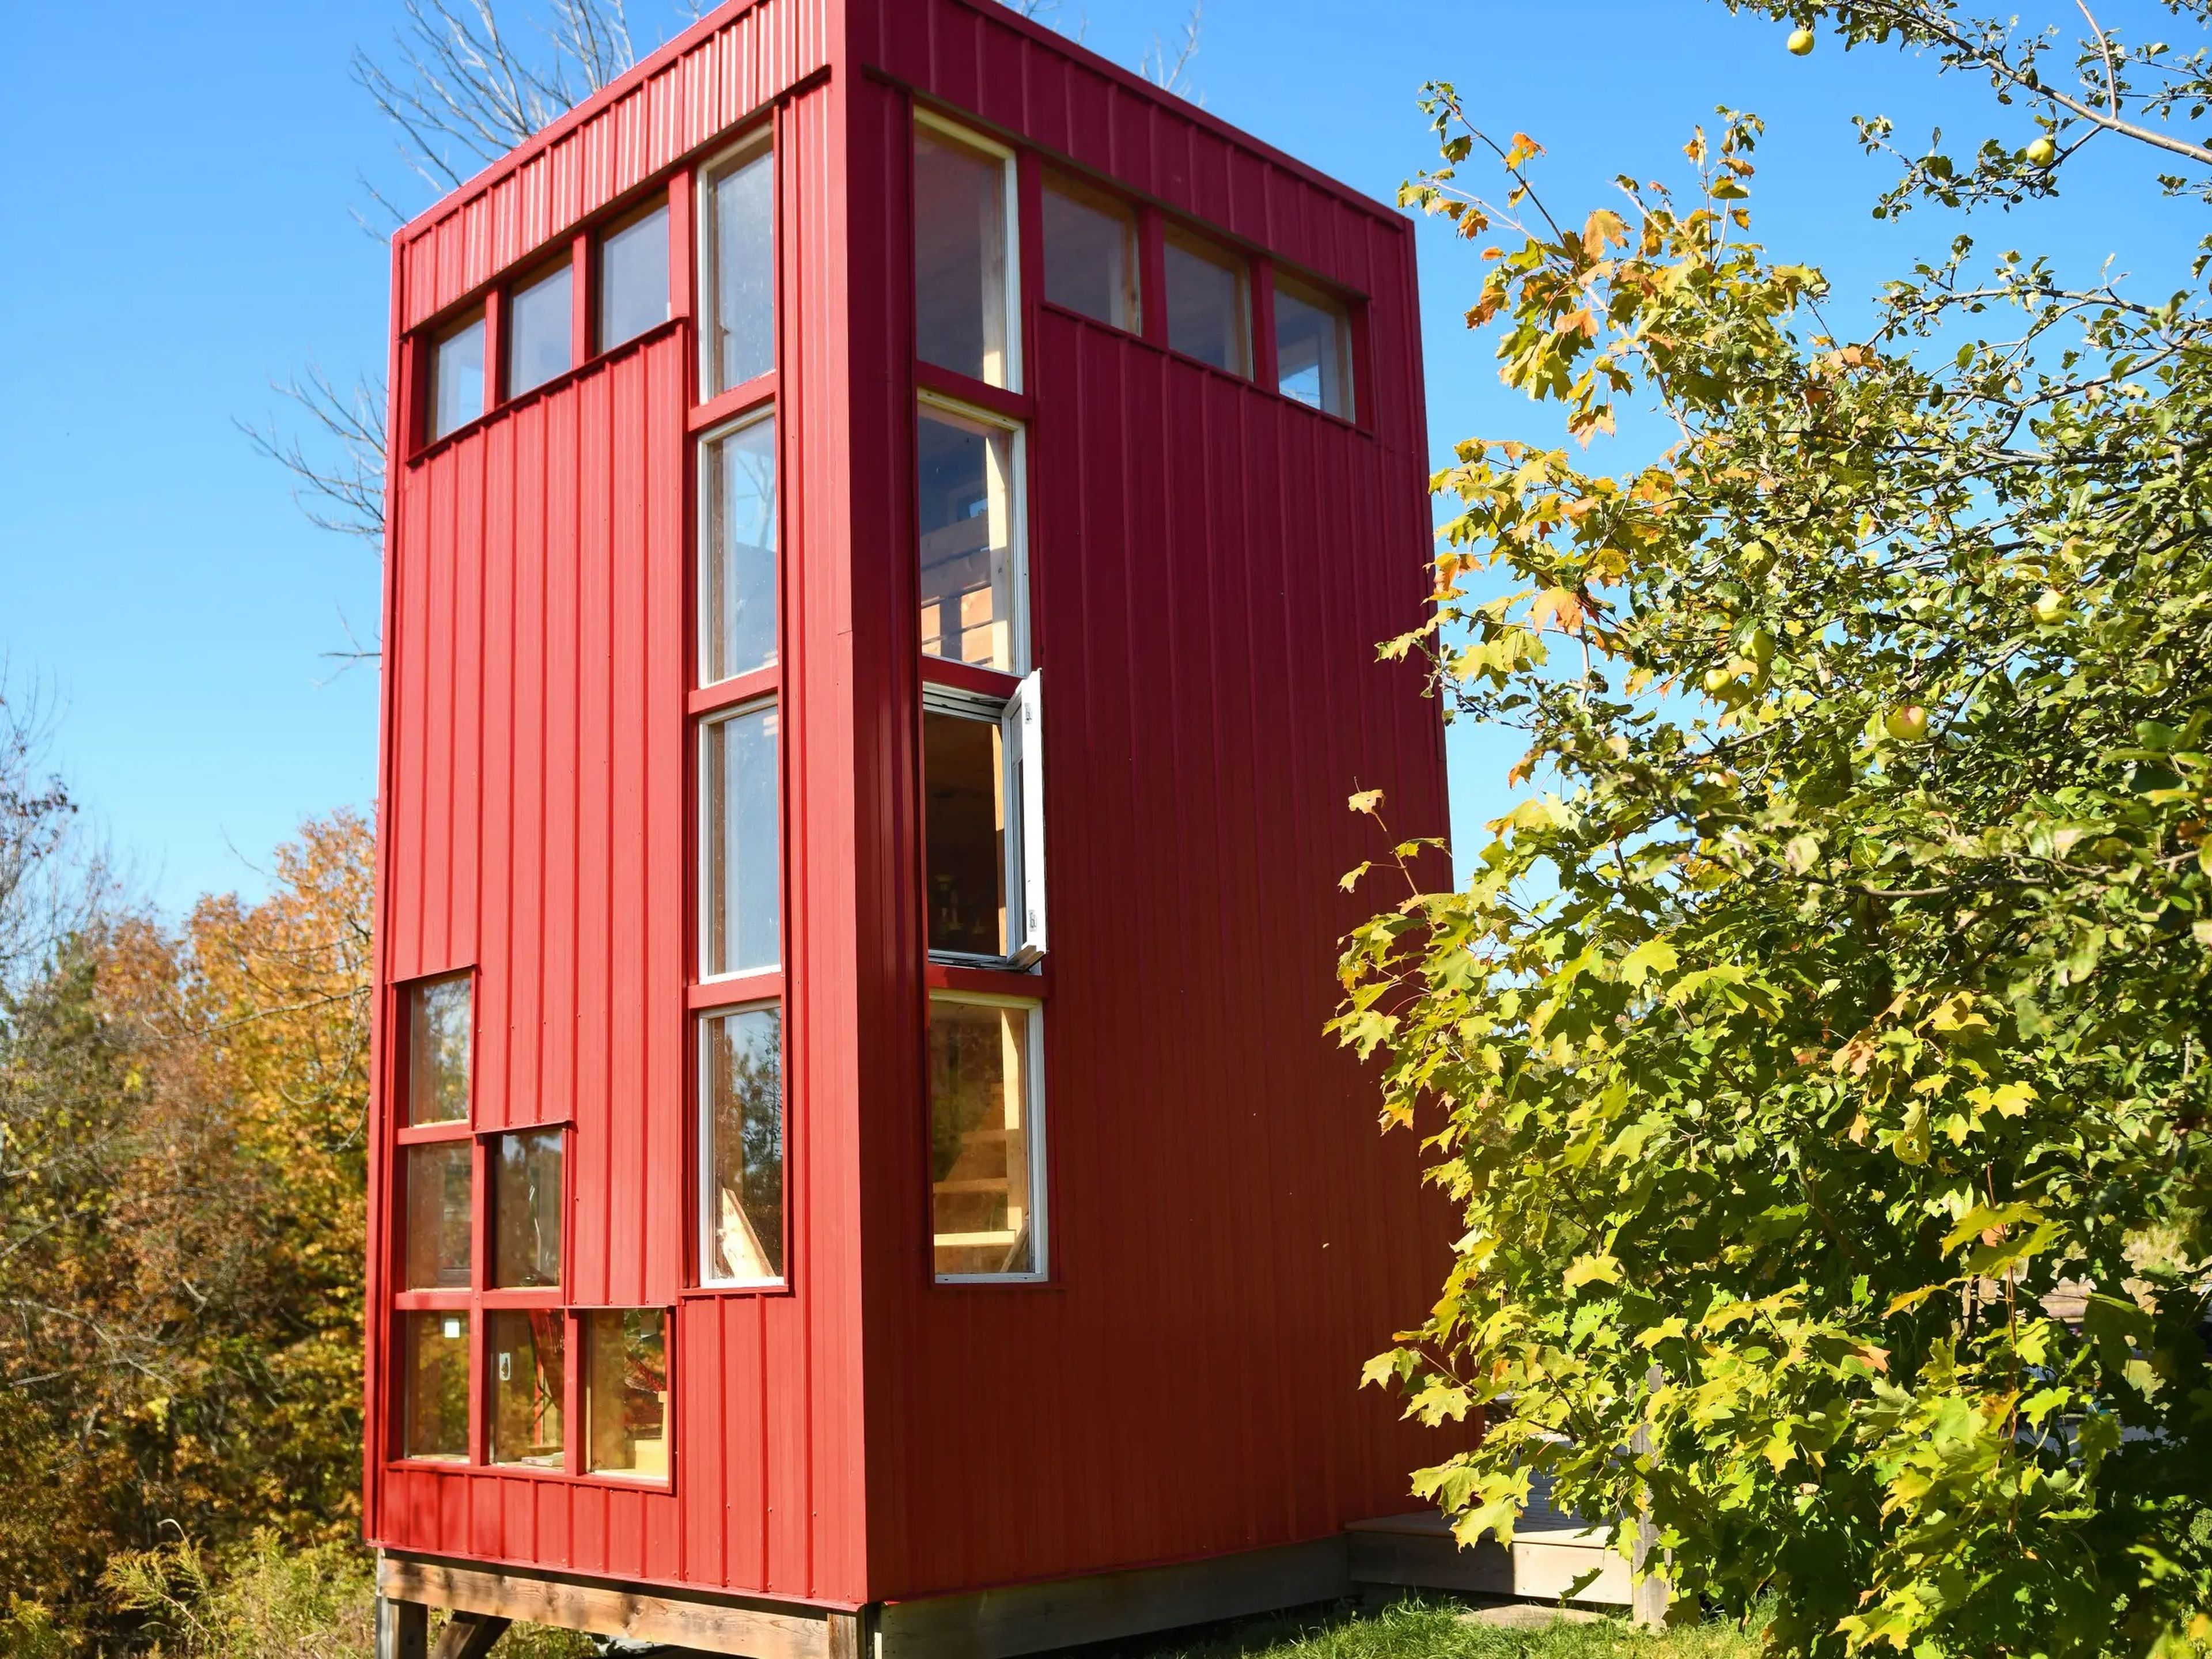 Photo of the red tower tiny house rental from a distance. It has several square windows.